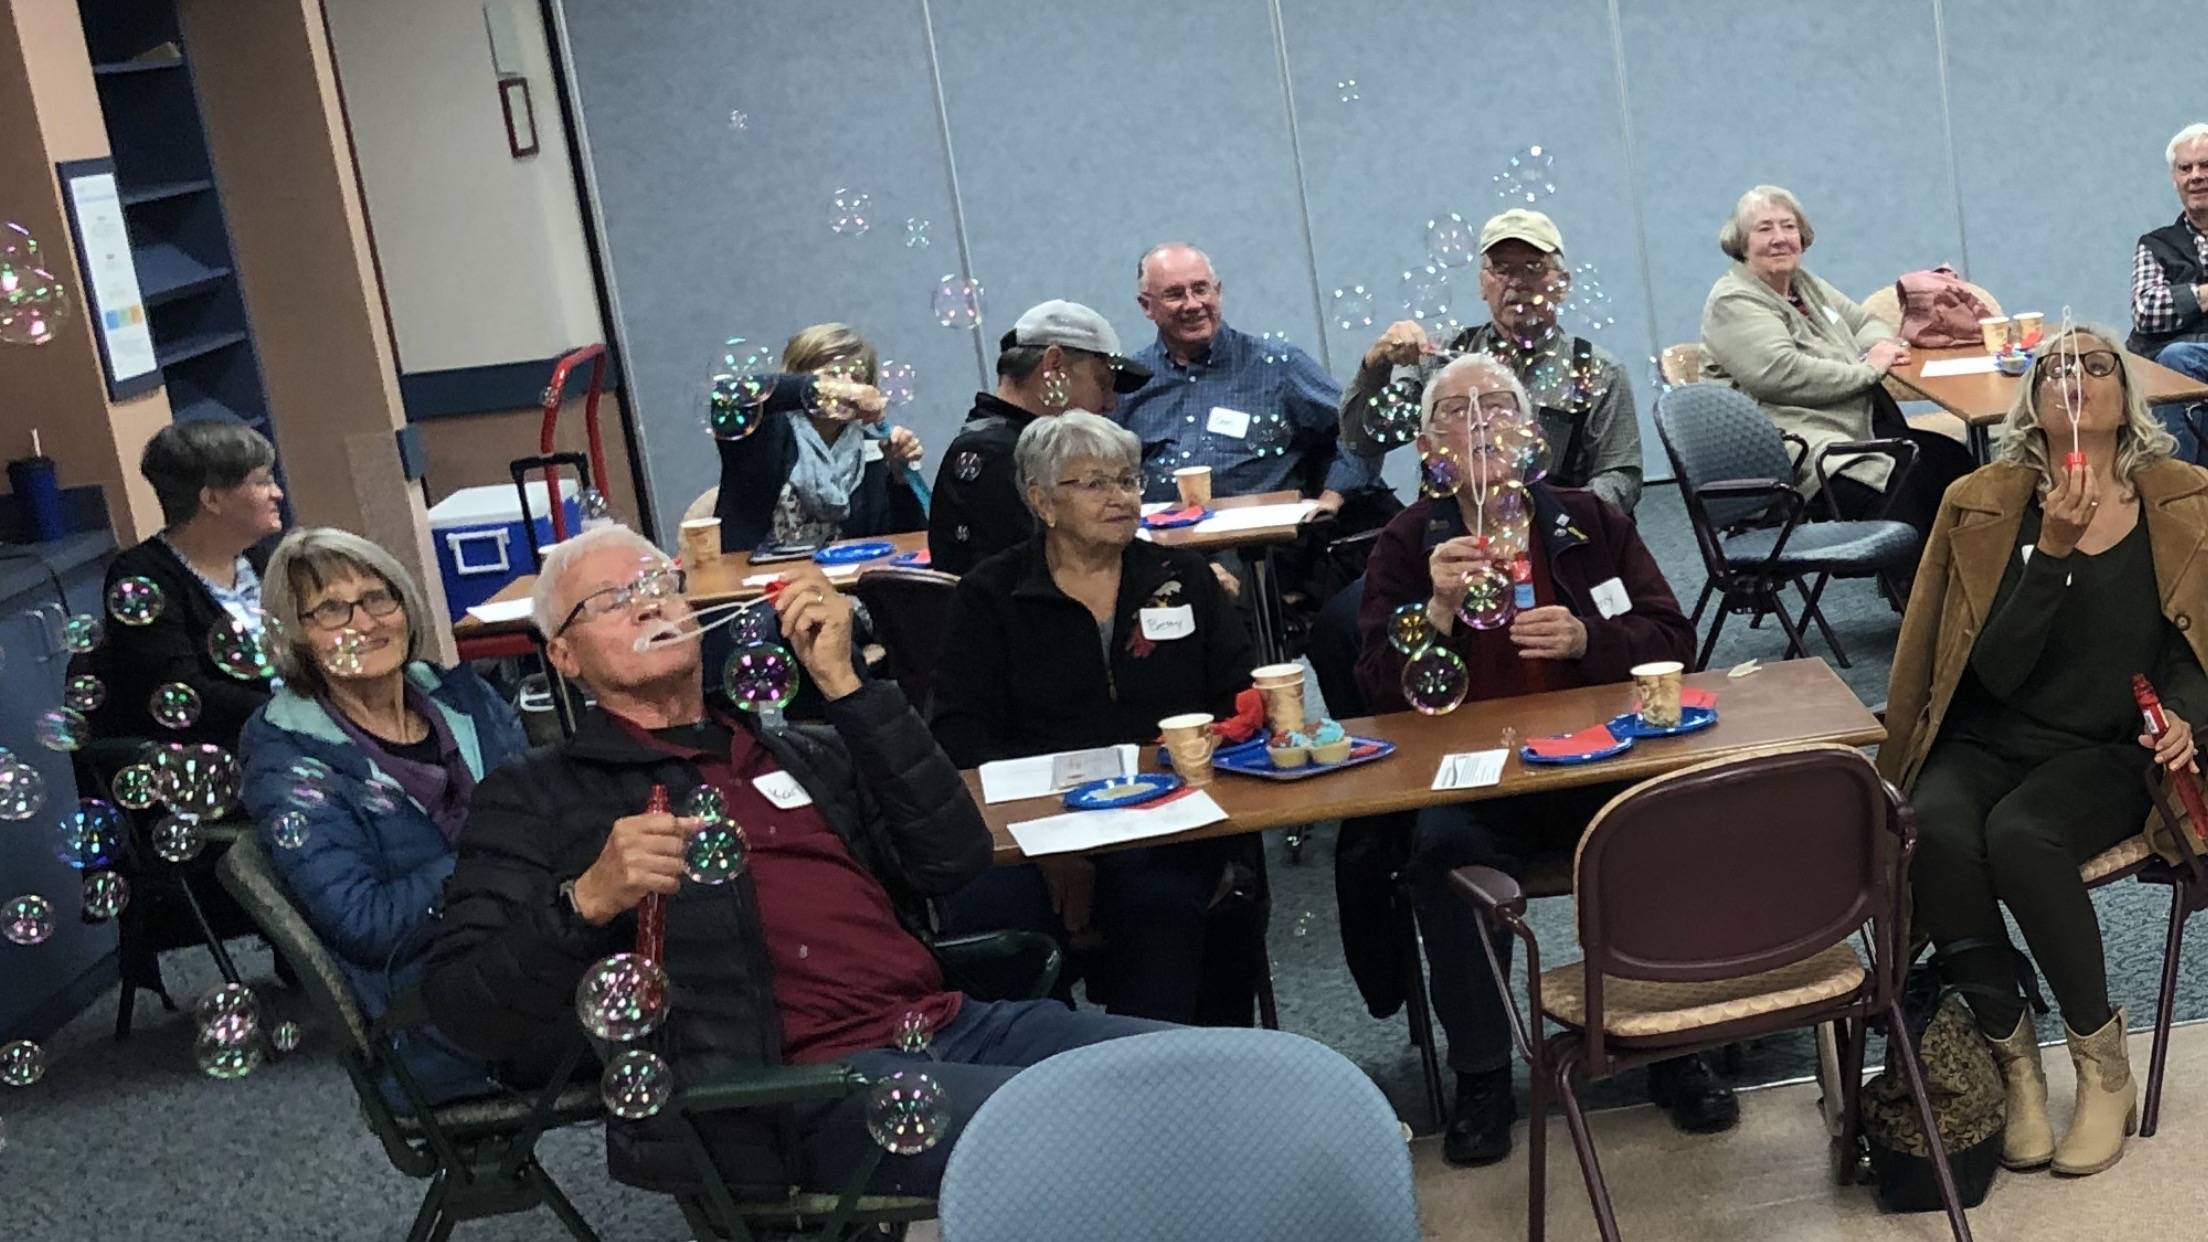 Past pictures of our support group blowing bubble together for PF. Laughter and friendship at our Christmas luncheon.